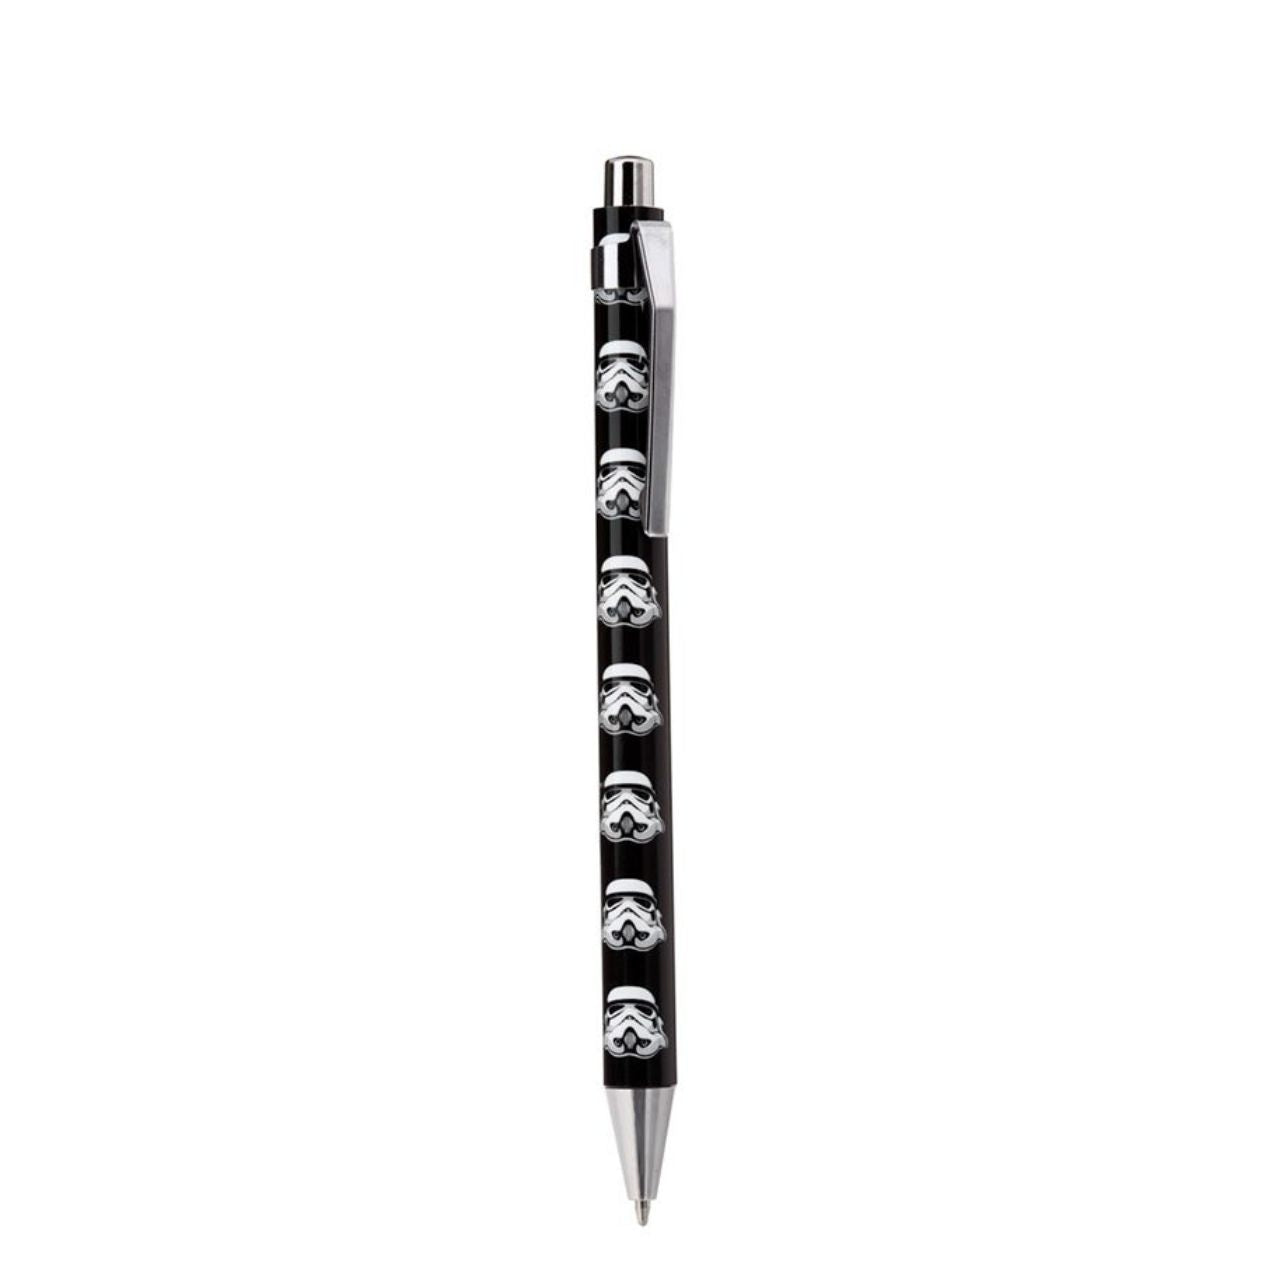 The Original Stormtrooper Pen Twin Set  Bring your writing projects to life with this officially licensed pair of Stormtrooper pens. Featuring a black ink refill and durable metal construction, this set is perfect for everyday use. The unique design makes it ideal for any Star Wars fan.